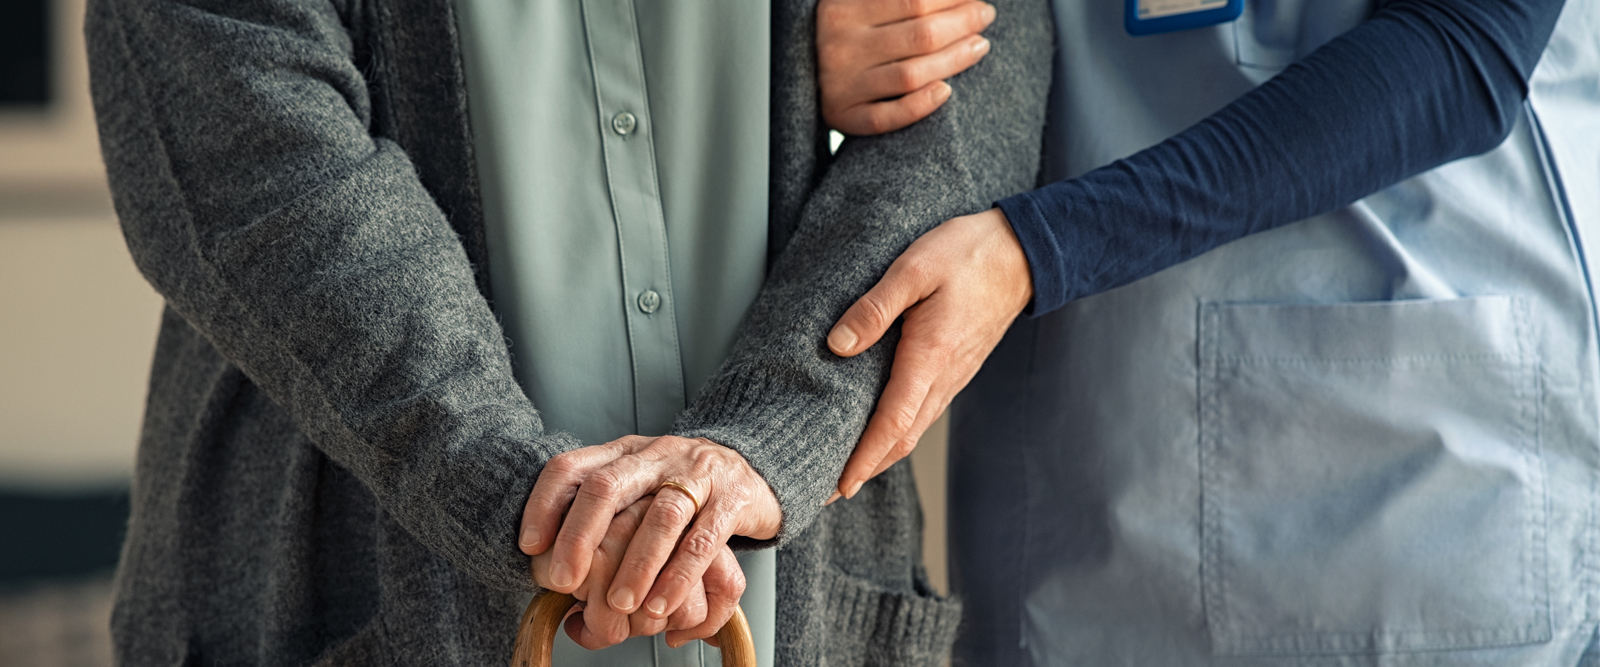 A caregiver holding onto a person with a cane.